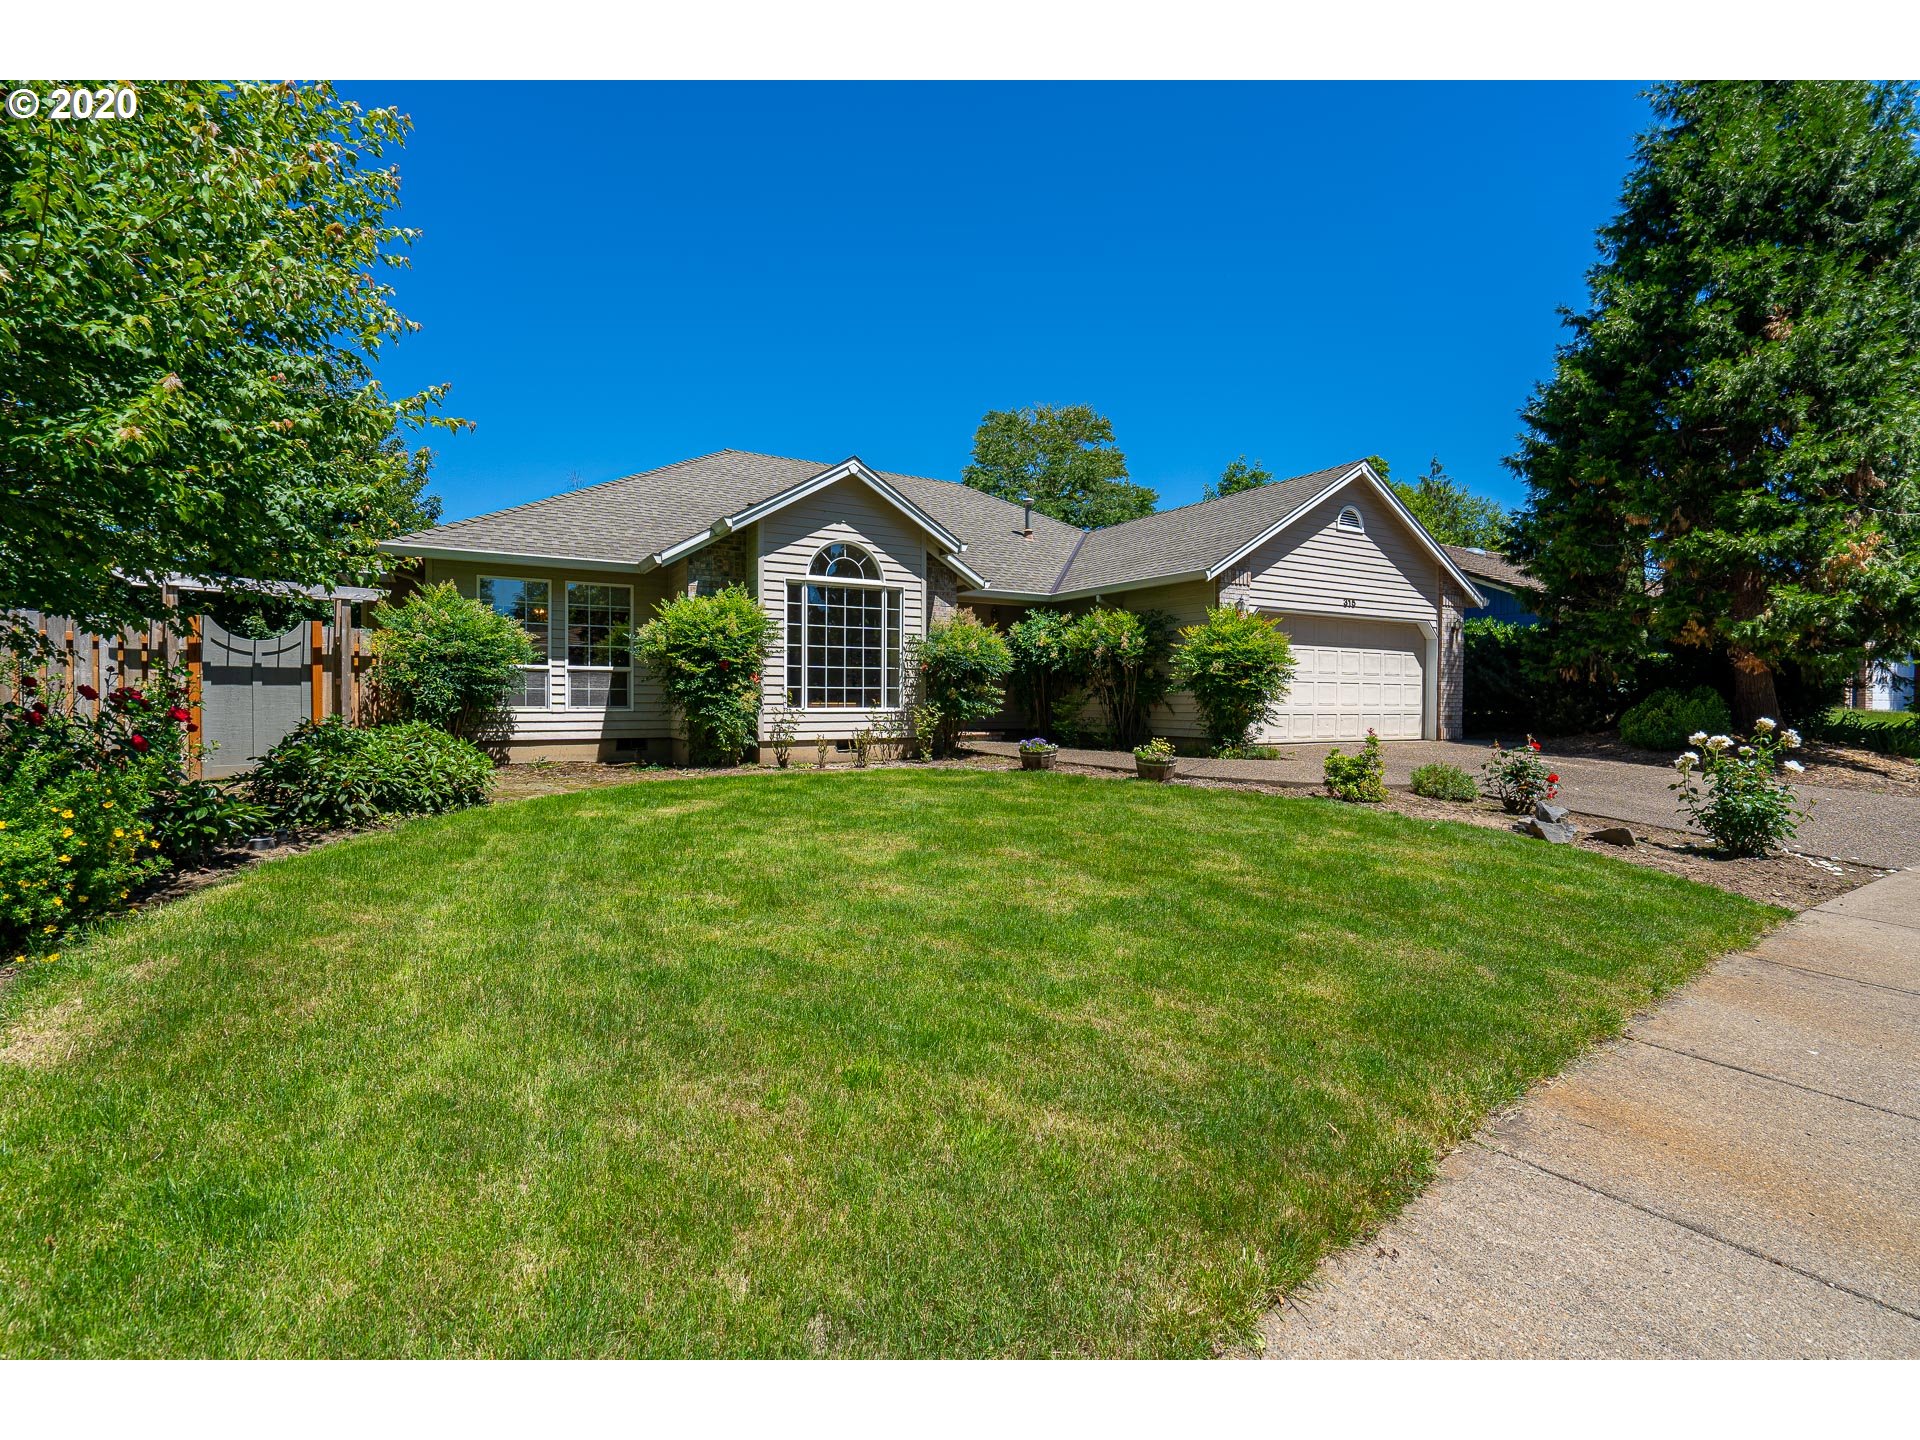 315 E Donald Ln , Newberg, OR 97132 Listing 20182012 by